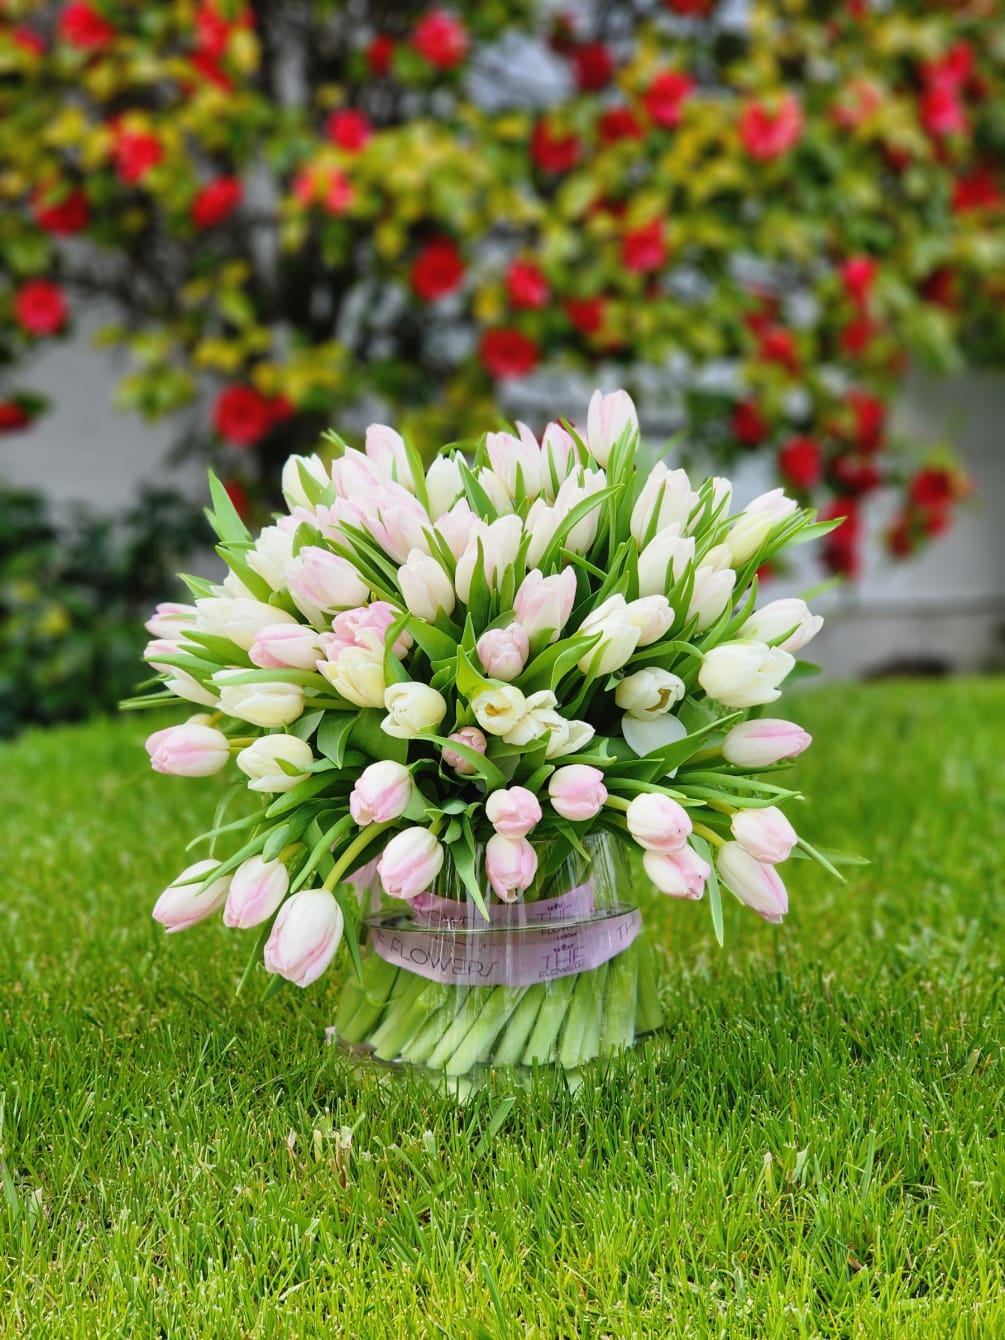 Tulips are one of the most romantic flowers, as they look very